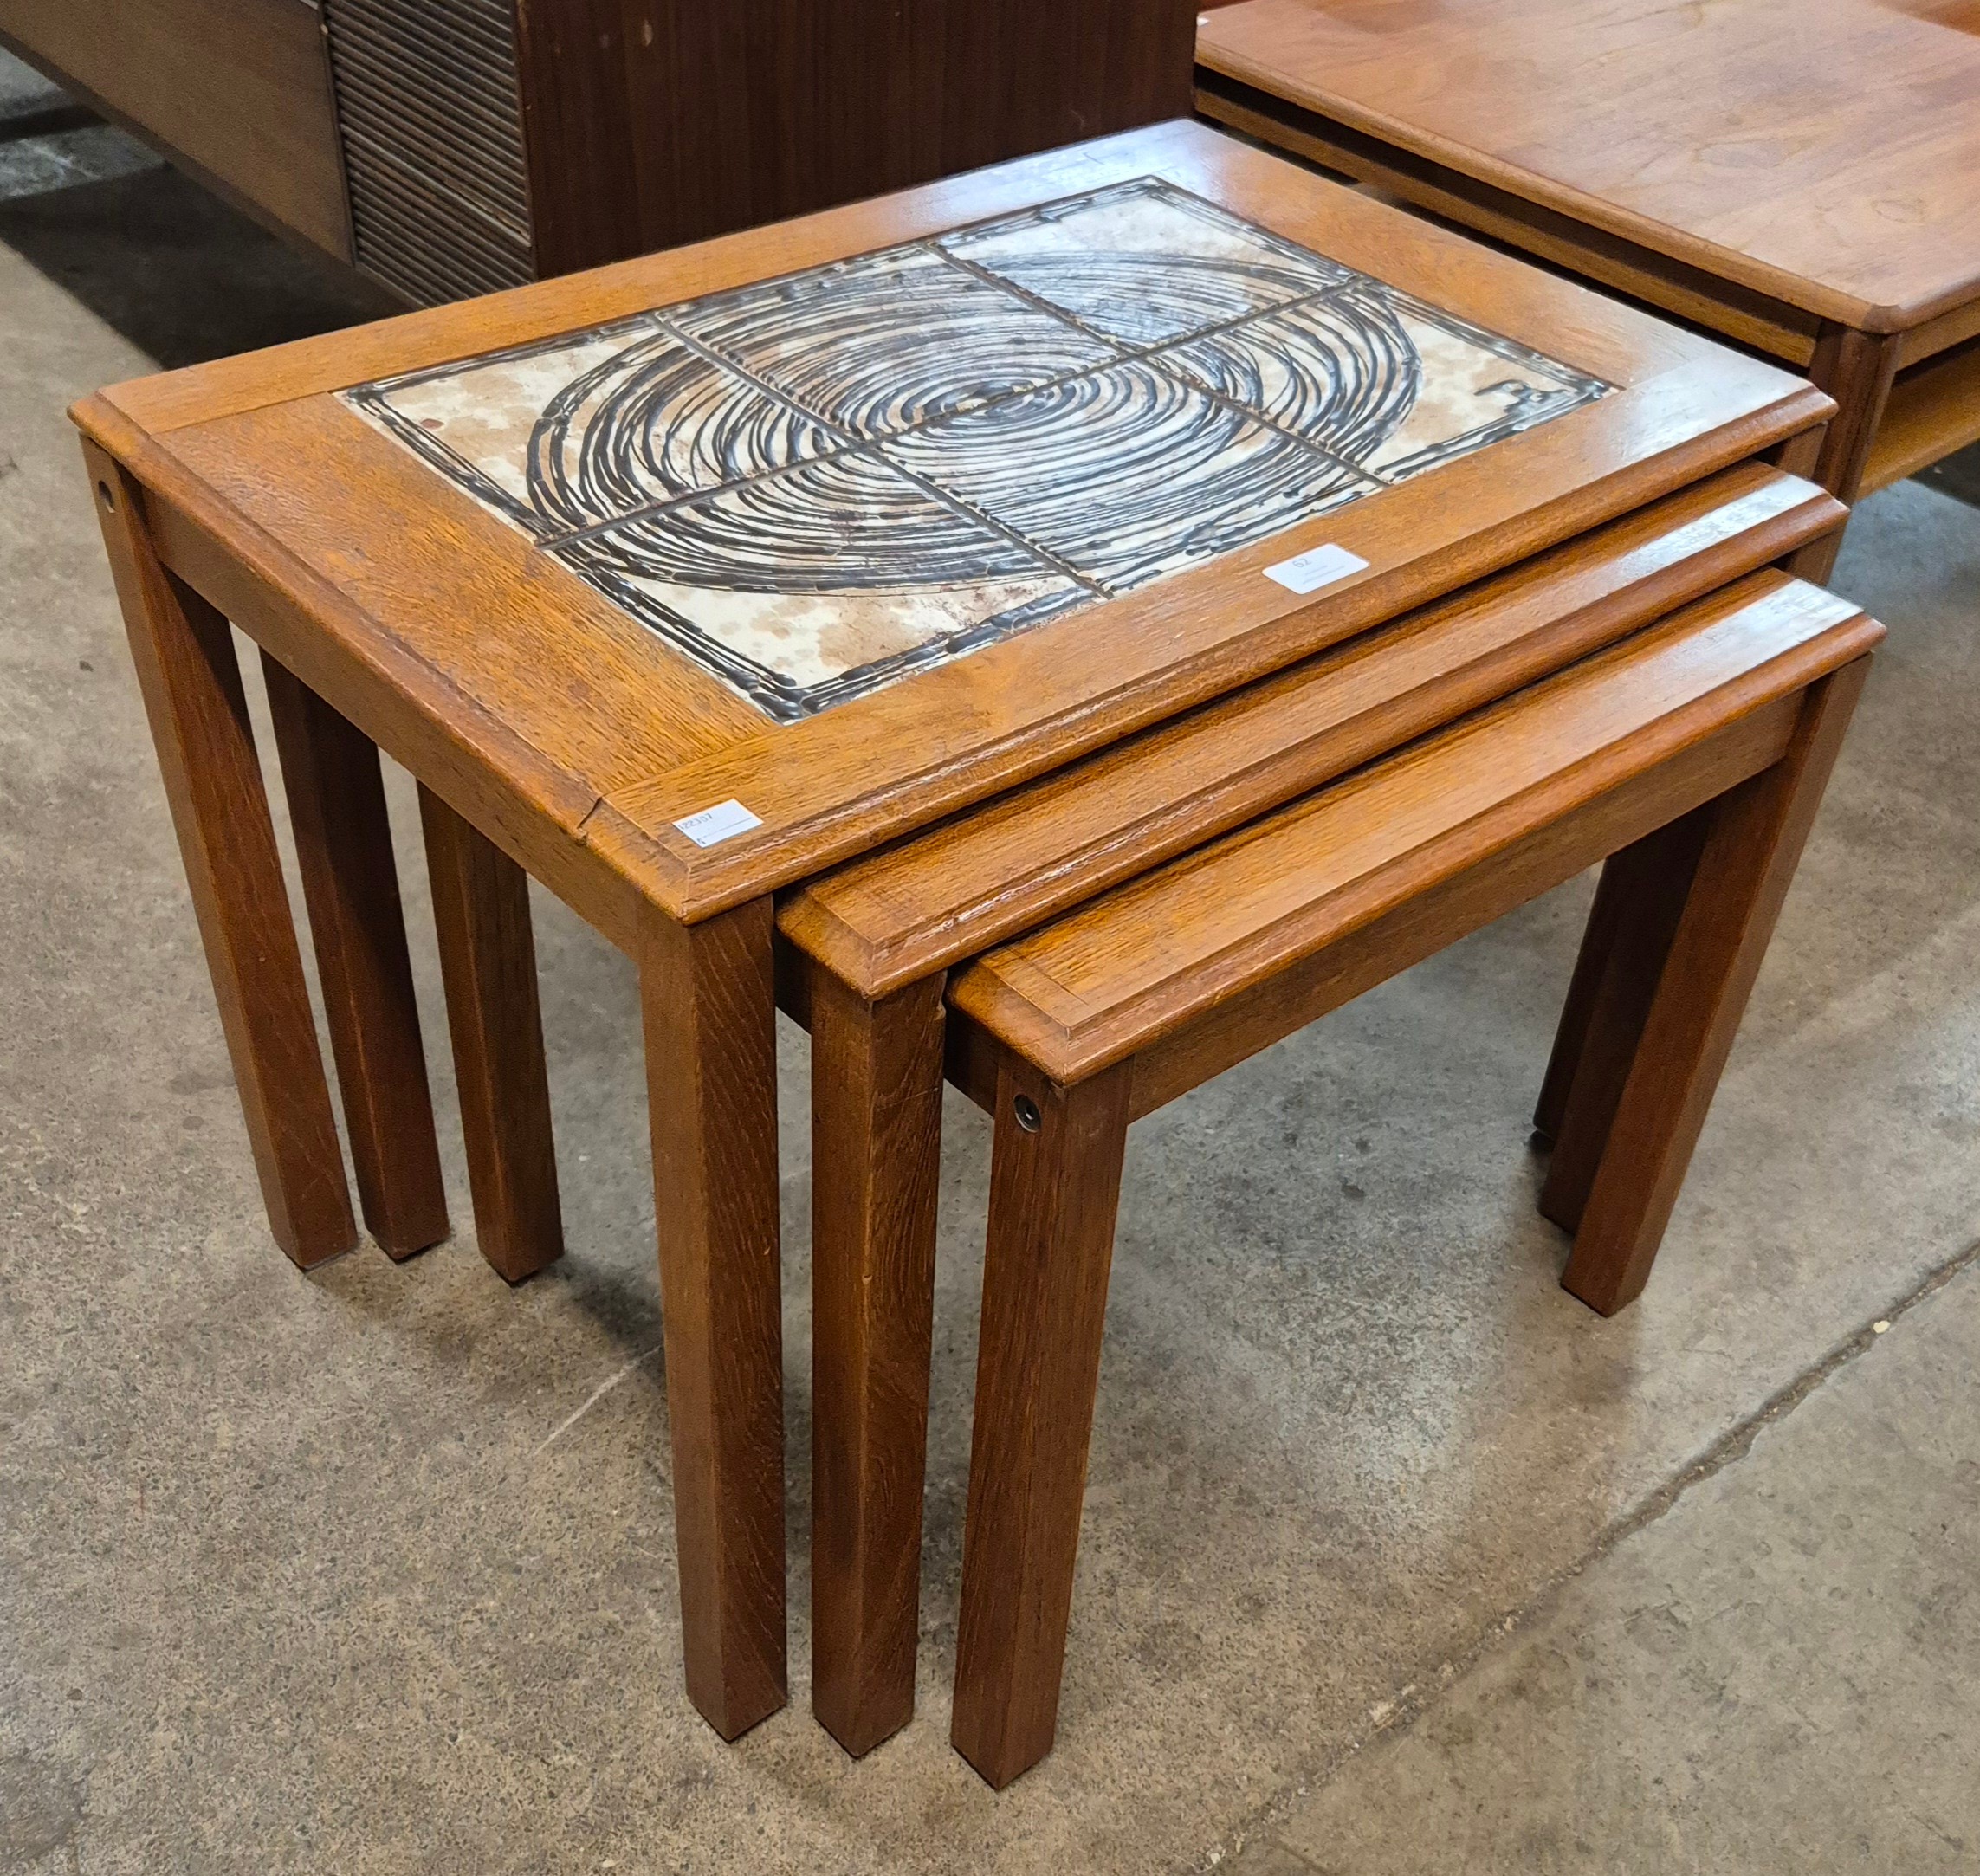 A Danish Trioh teak and tiled topped nest of tables